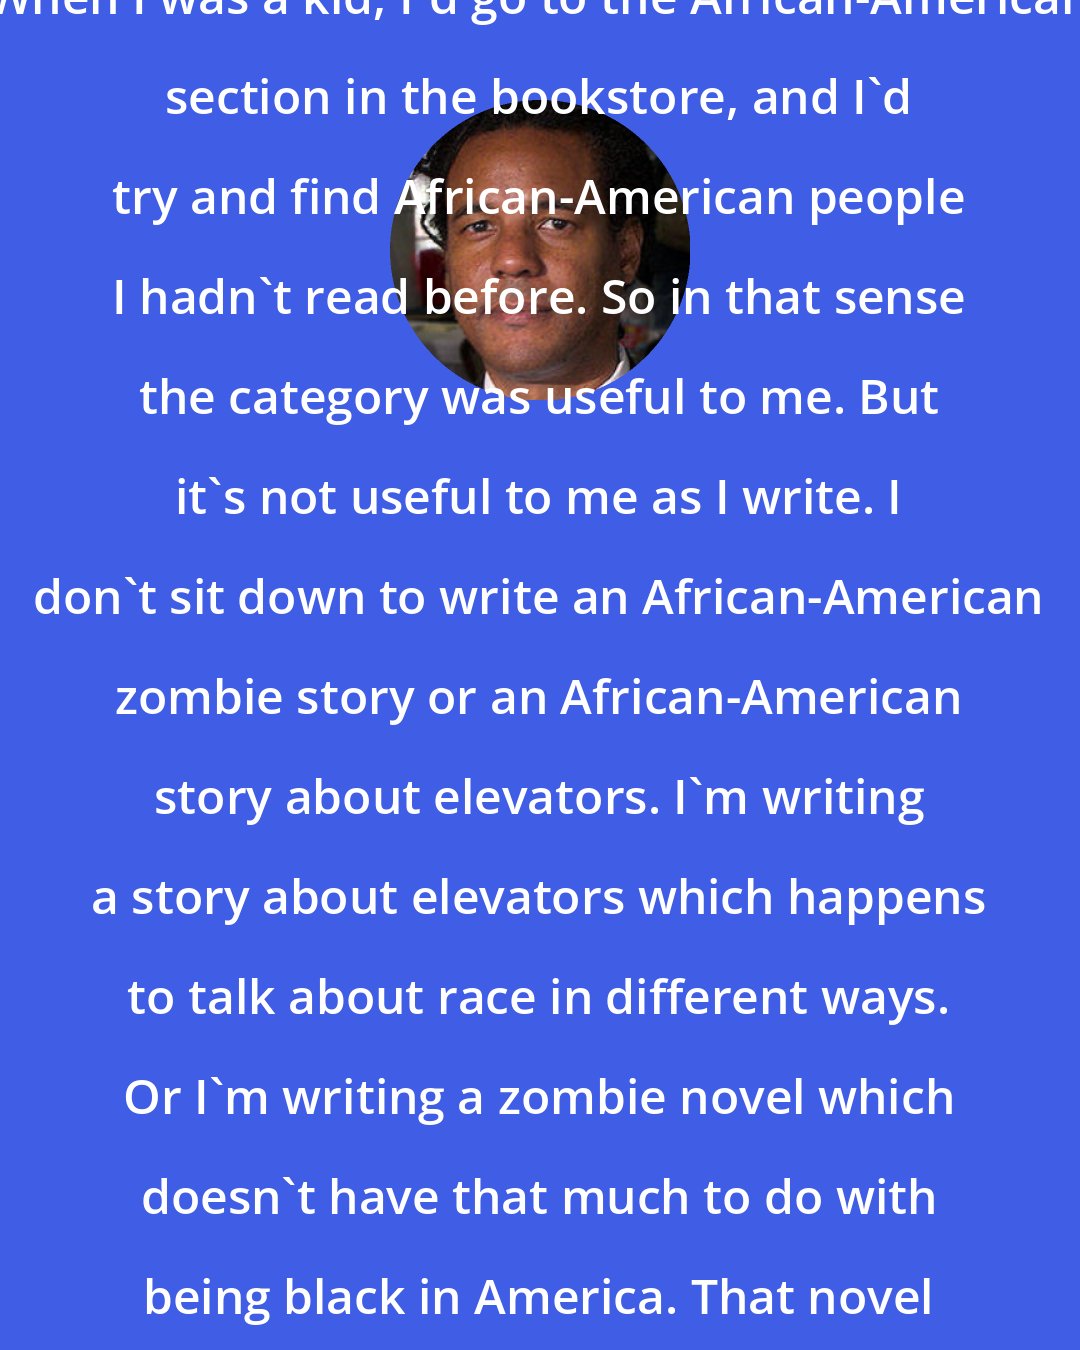 Colson Whitehead: When I was a kid, I'd go to the African-American section in the bookstore, and I'd try and find African-American people I hadn't read before. So in that sense the category was useful to me. But it's not useful to me as I write. I don't sit down to write an African-American zombie story or an African-American story about elevators. I'm writing a story about elevators which happens to talk about race in different ways. Or I'm writing a zombie novel which doesn't have that much to do with being black in America. That novel is really about survival.